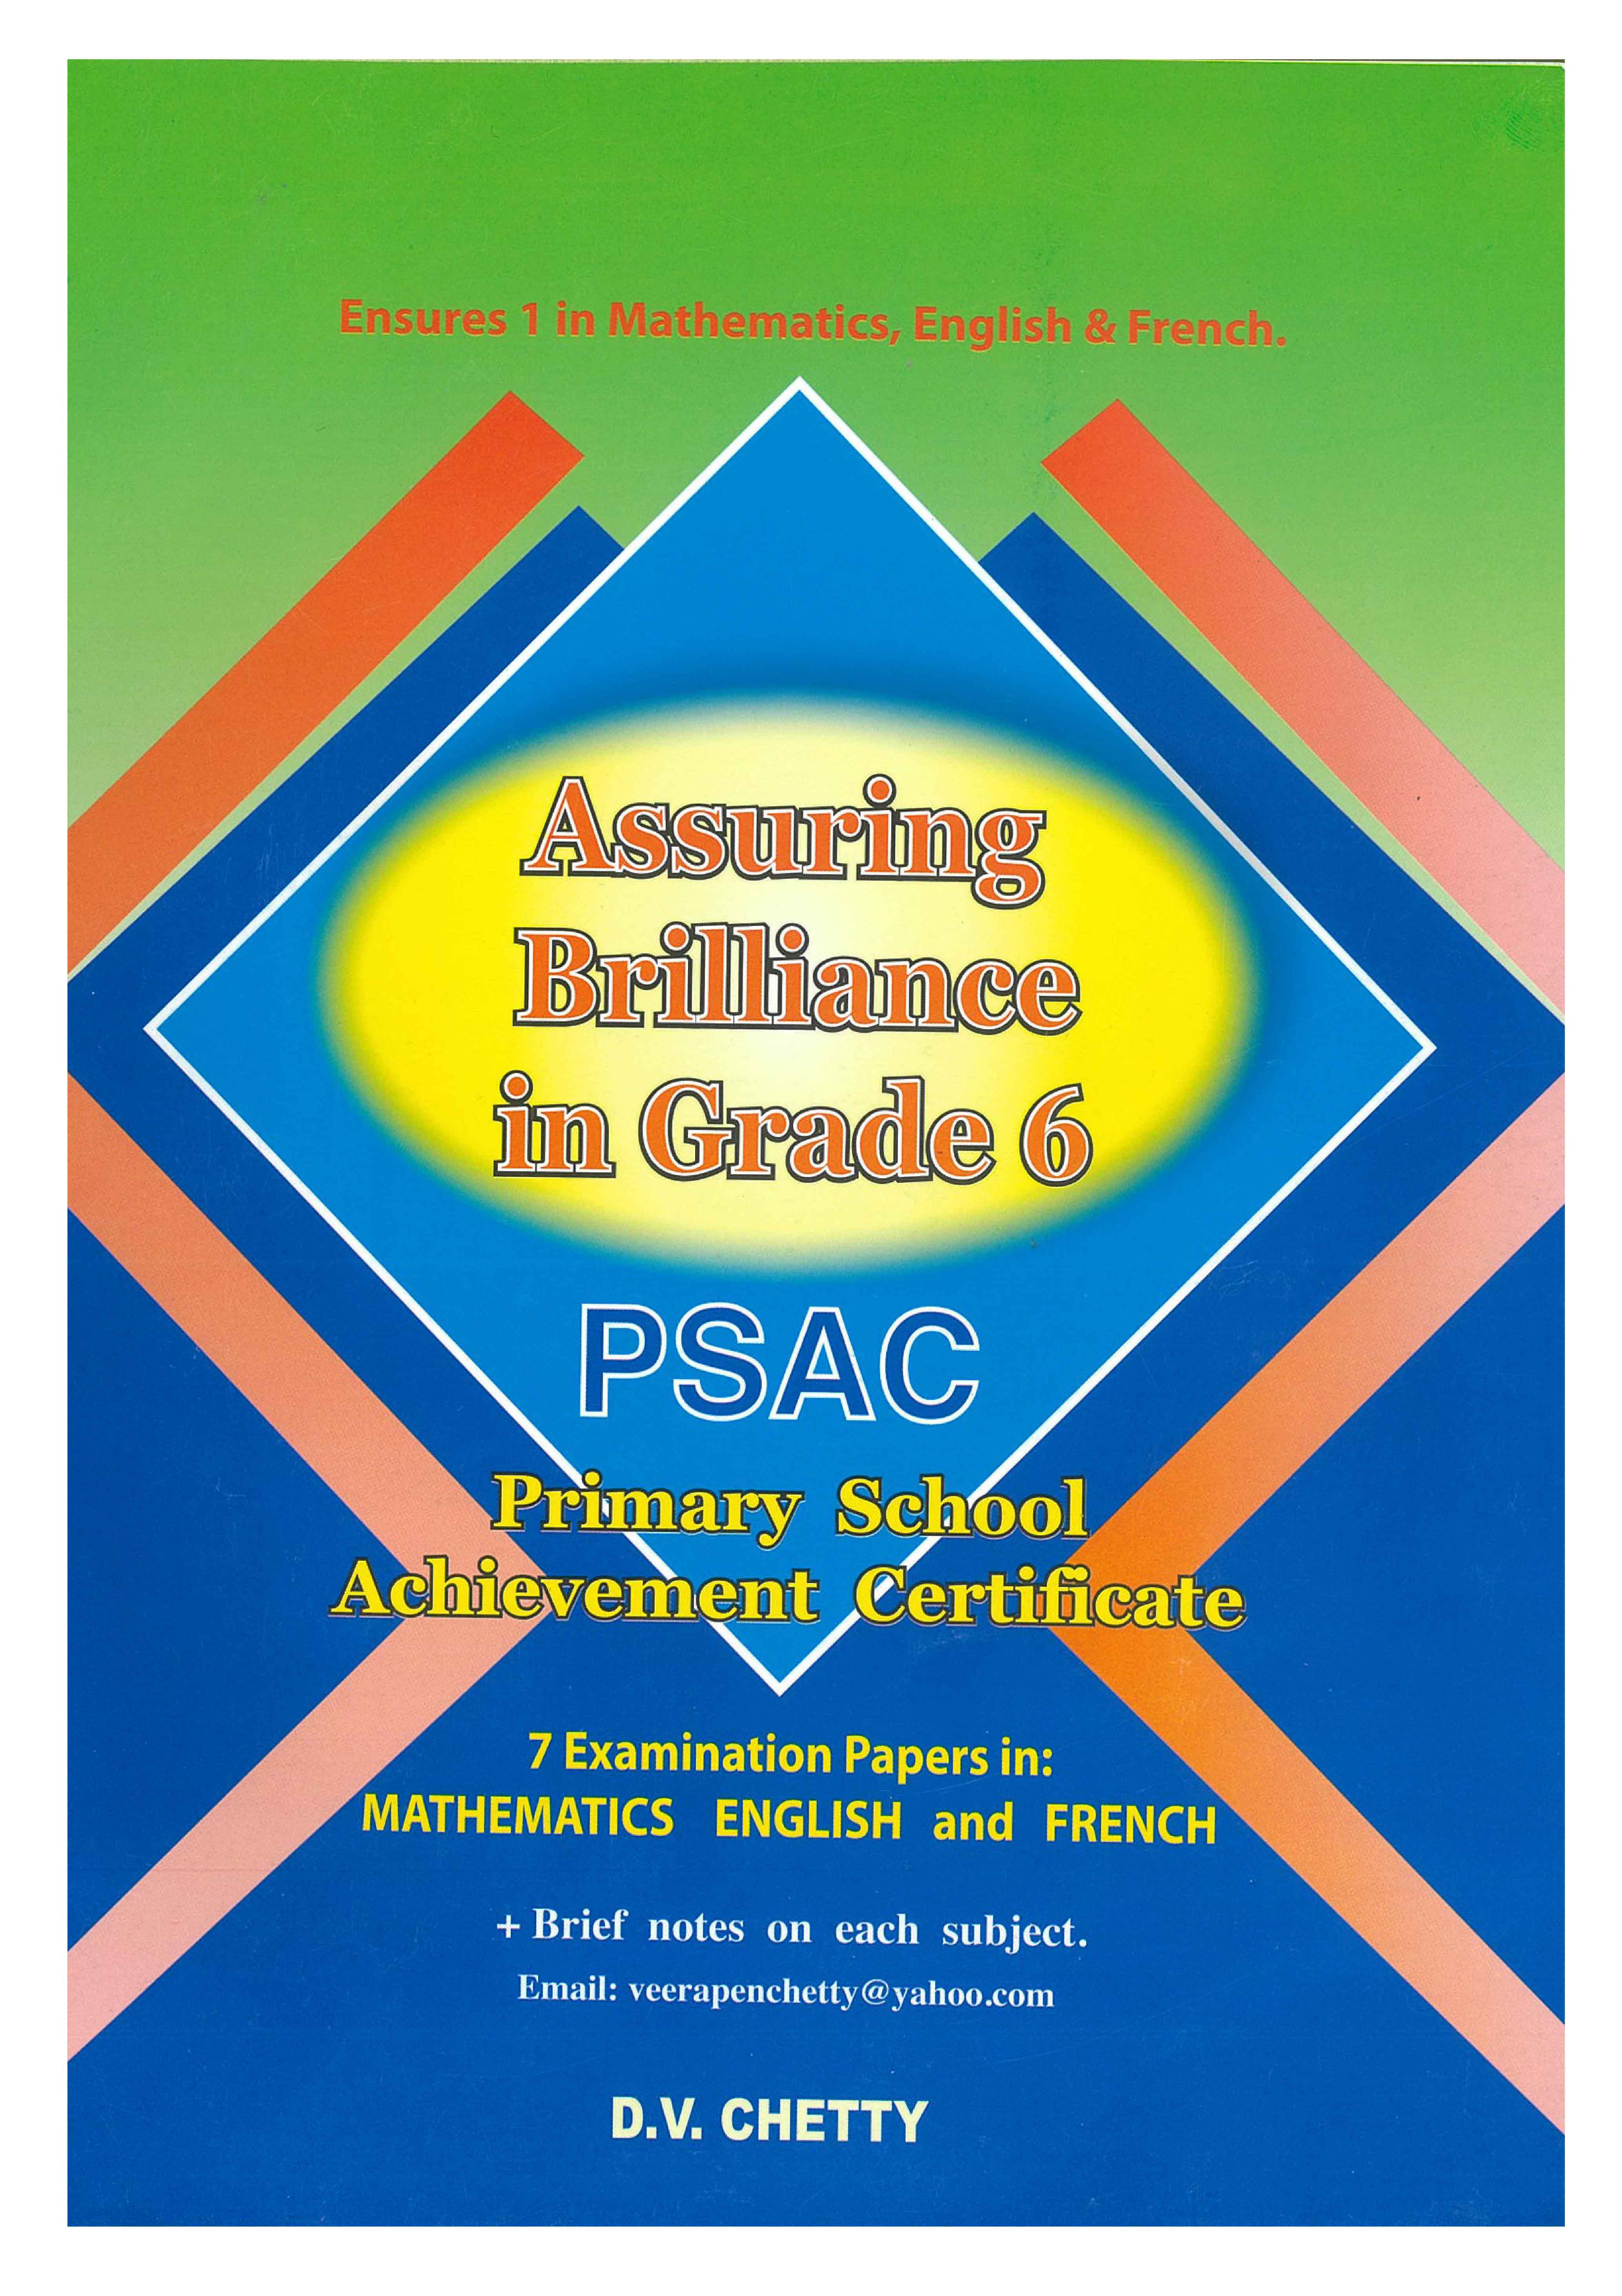 ASSURING BRILLIANCE IN GRADE 6 PSAC: 3 SUBJECTS MATHEMATUCS ENGLISH FRENCH